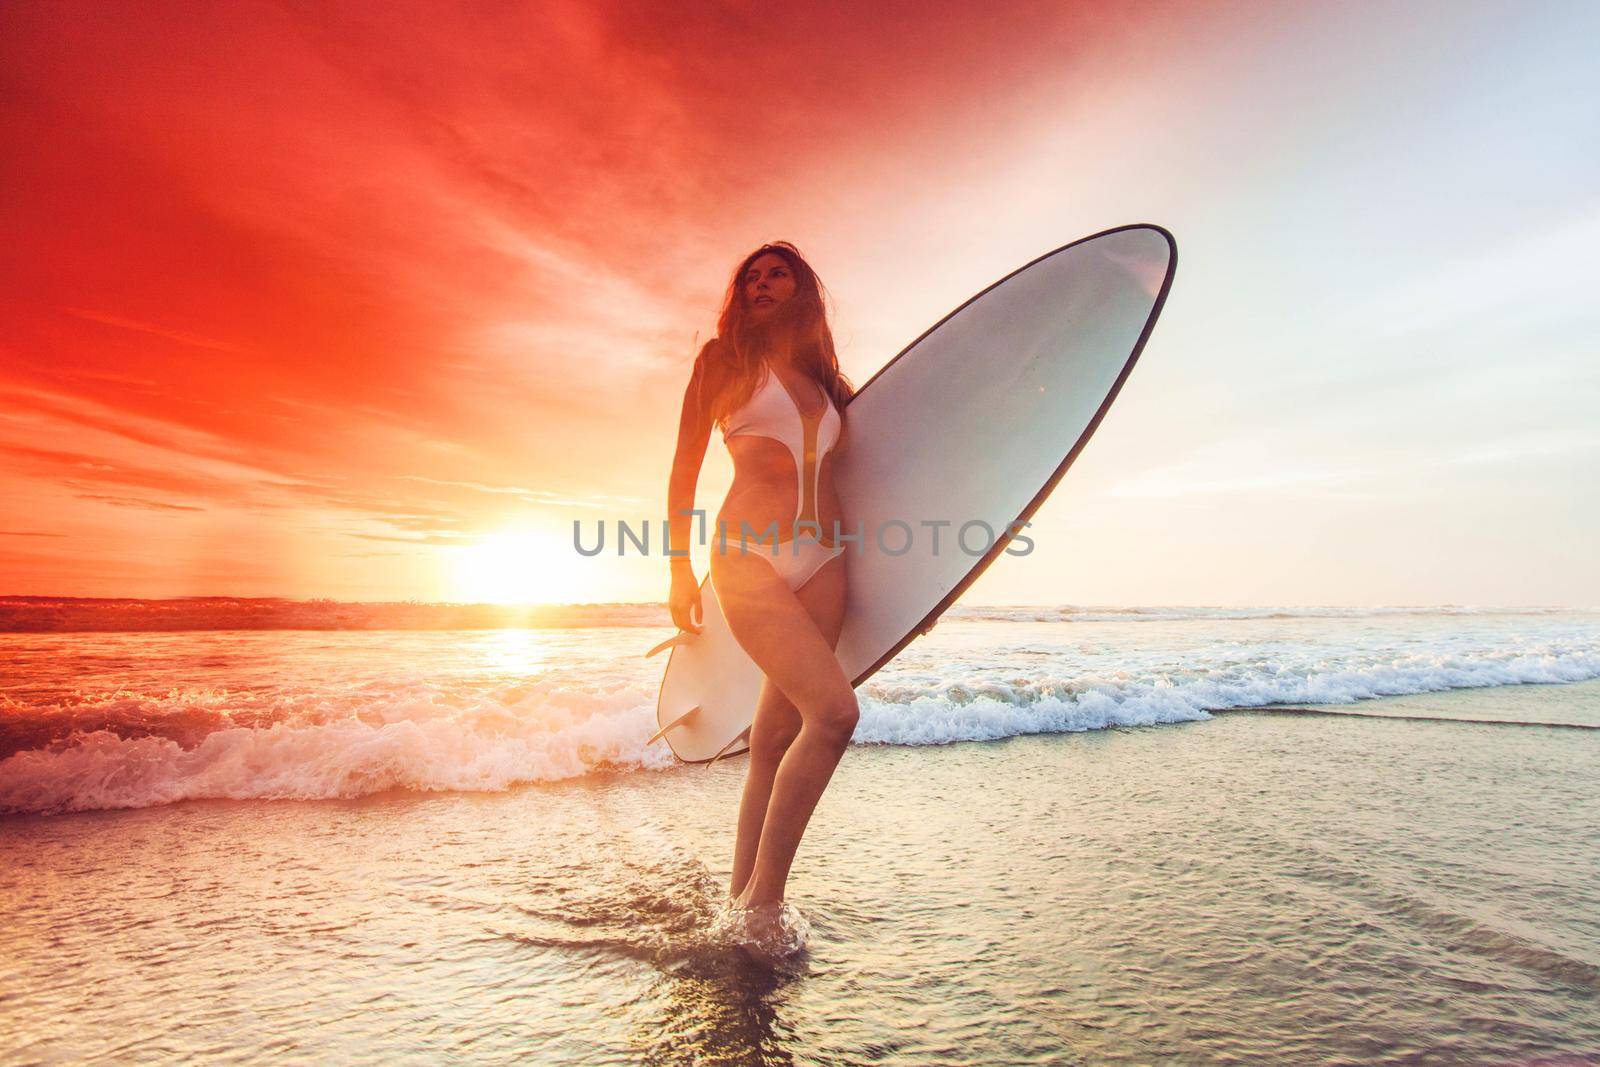 Woman holding surfboard at sunset by Yellowj